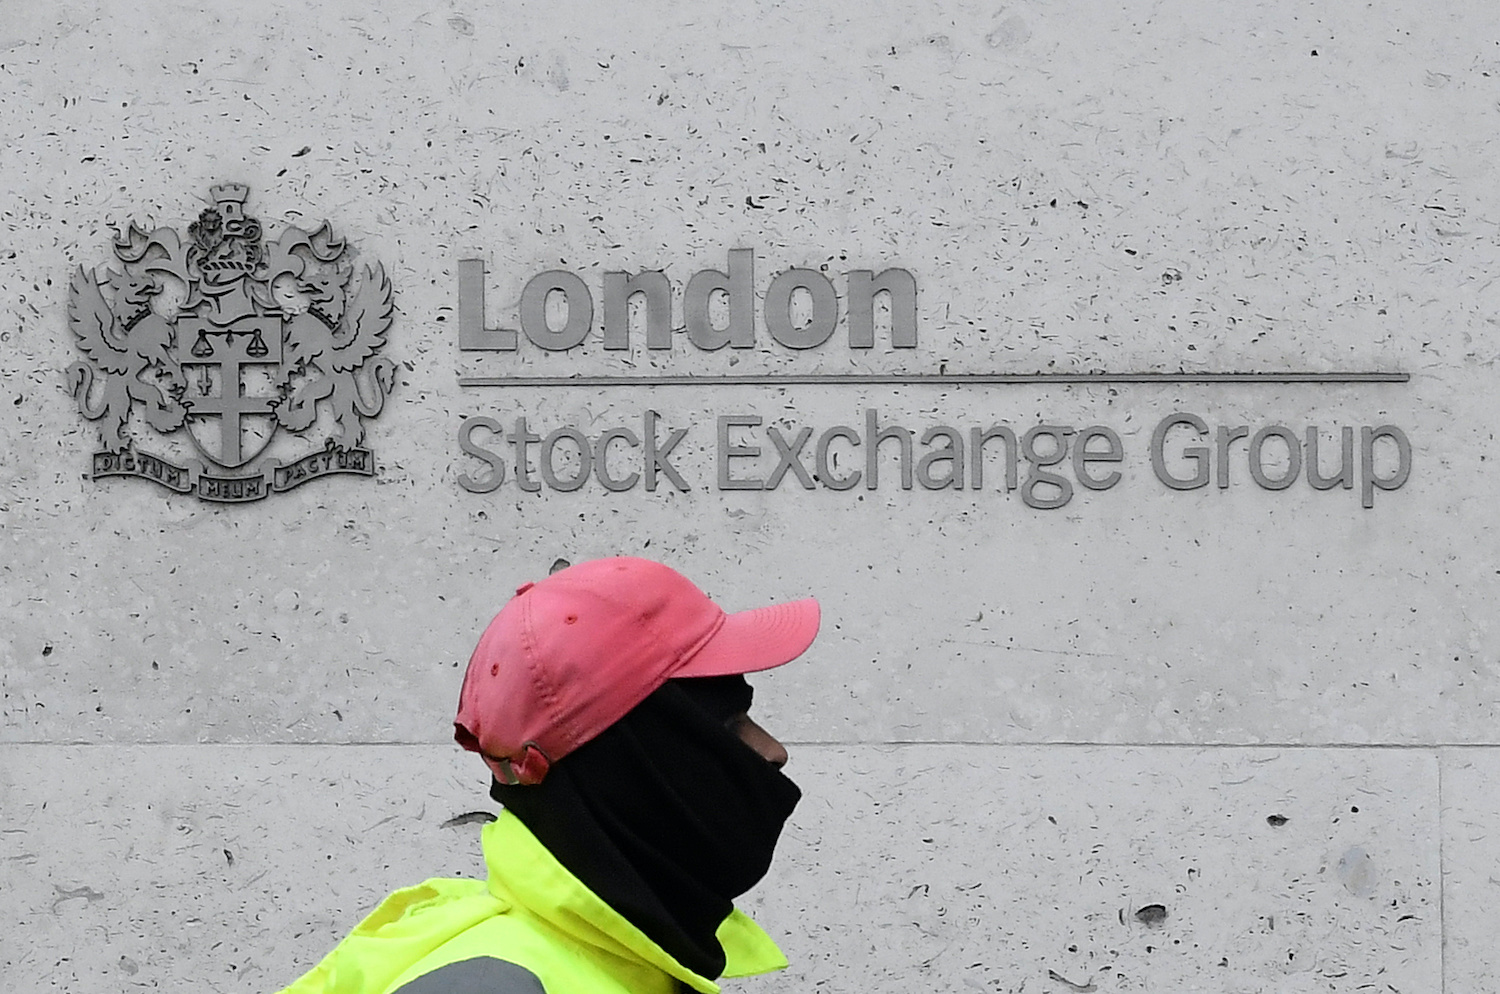 FTSE Russell drops eight China firms from indexes